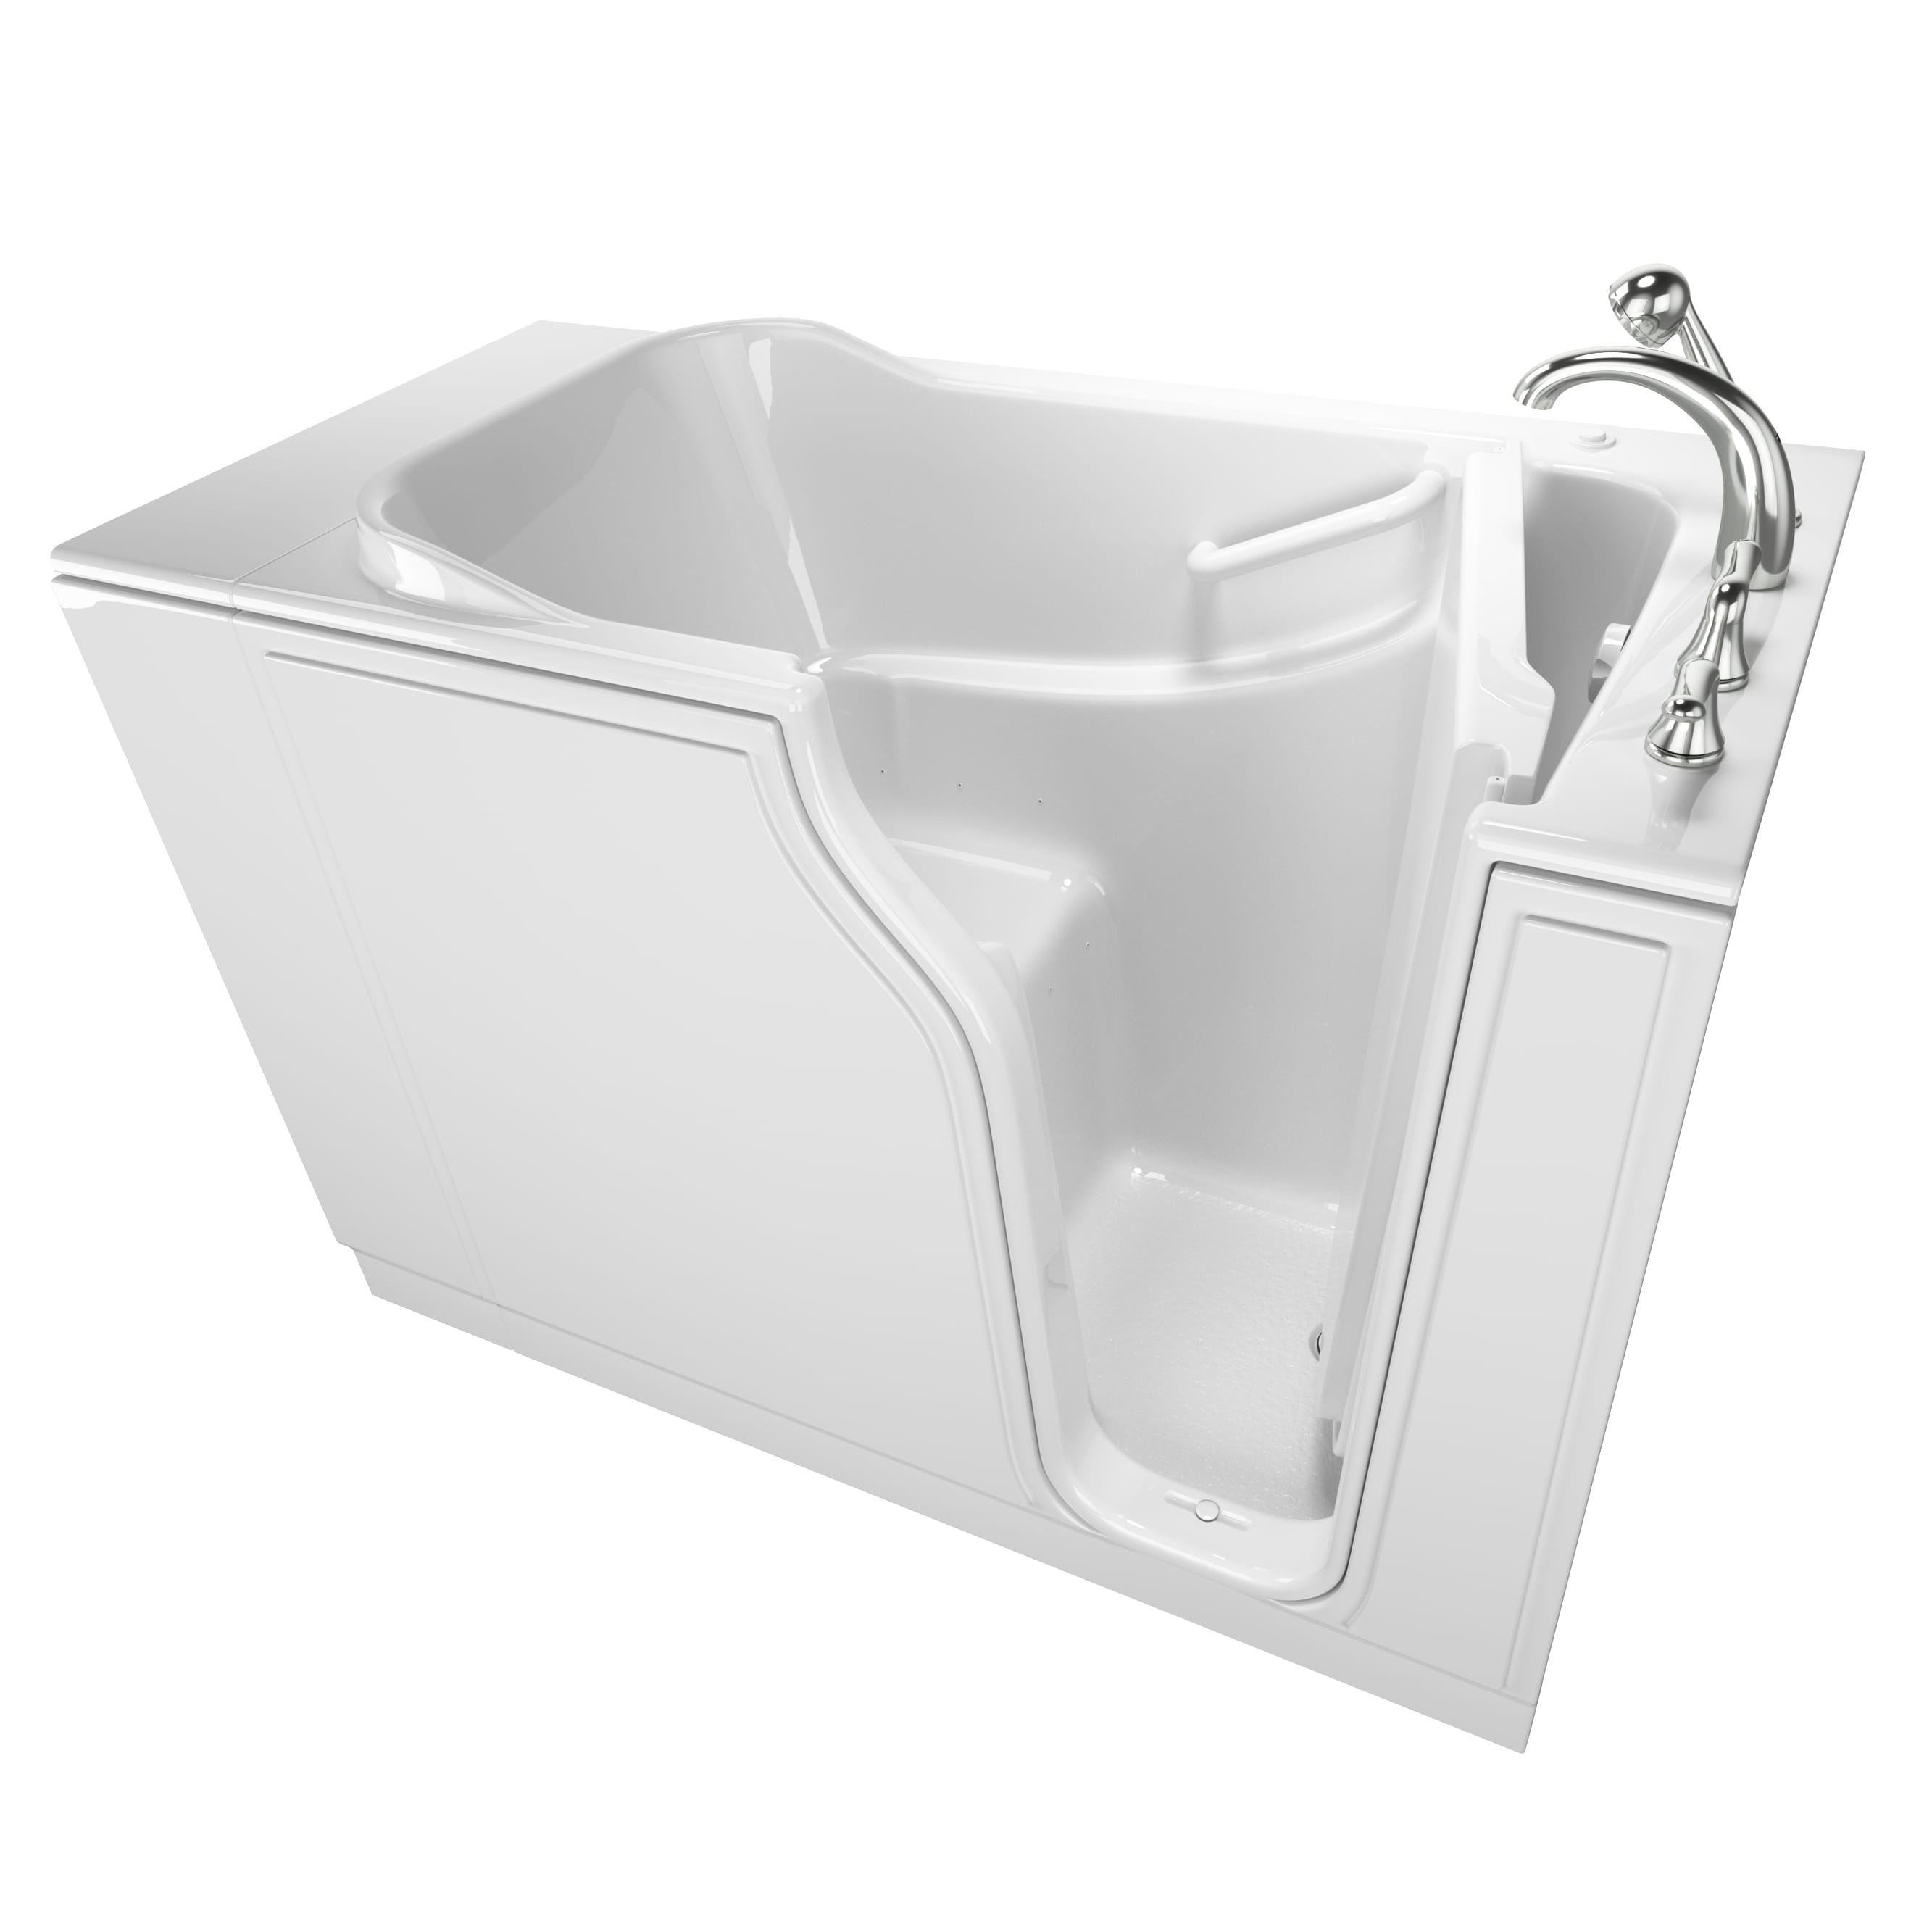 Gelcoat Entry Series 52 x 30-Inch Walk-In Tub With Air Spa System – Right-Hand Drain With Faucet